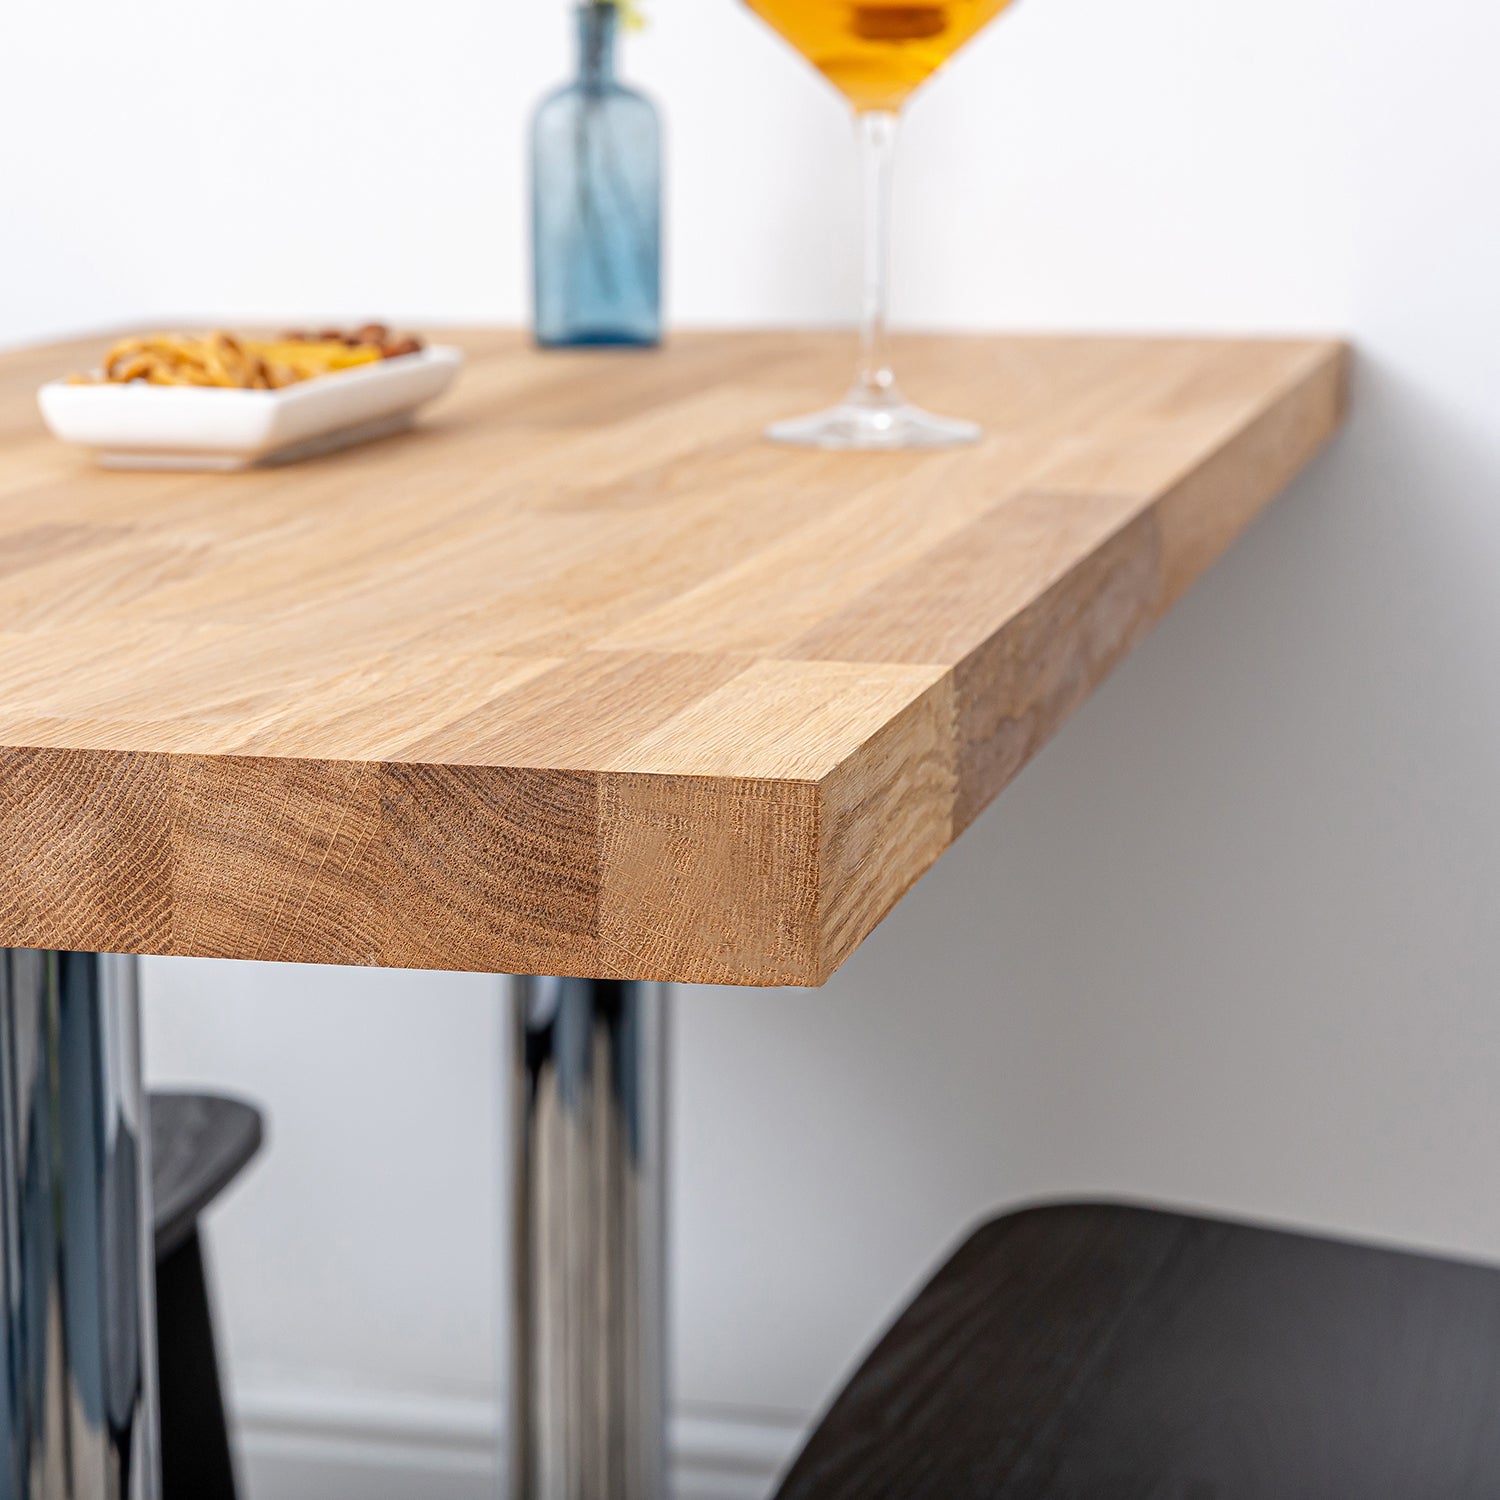 Solid Prime Oak Table tops